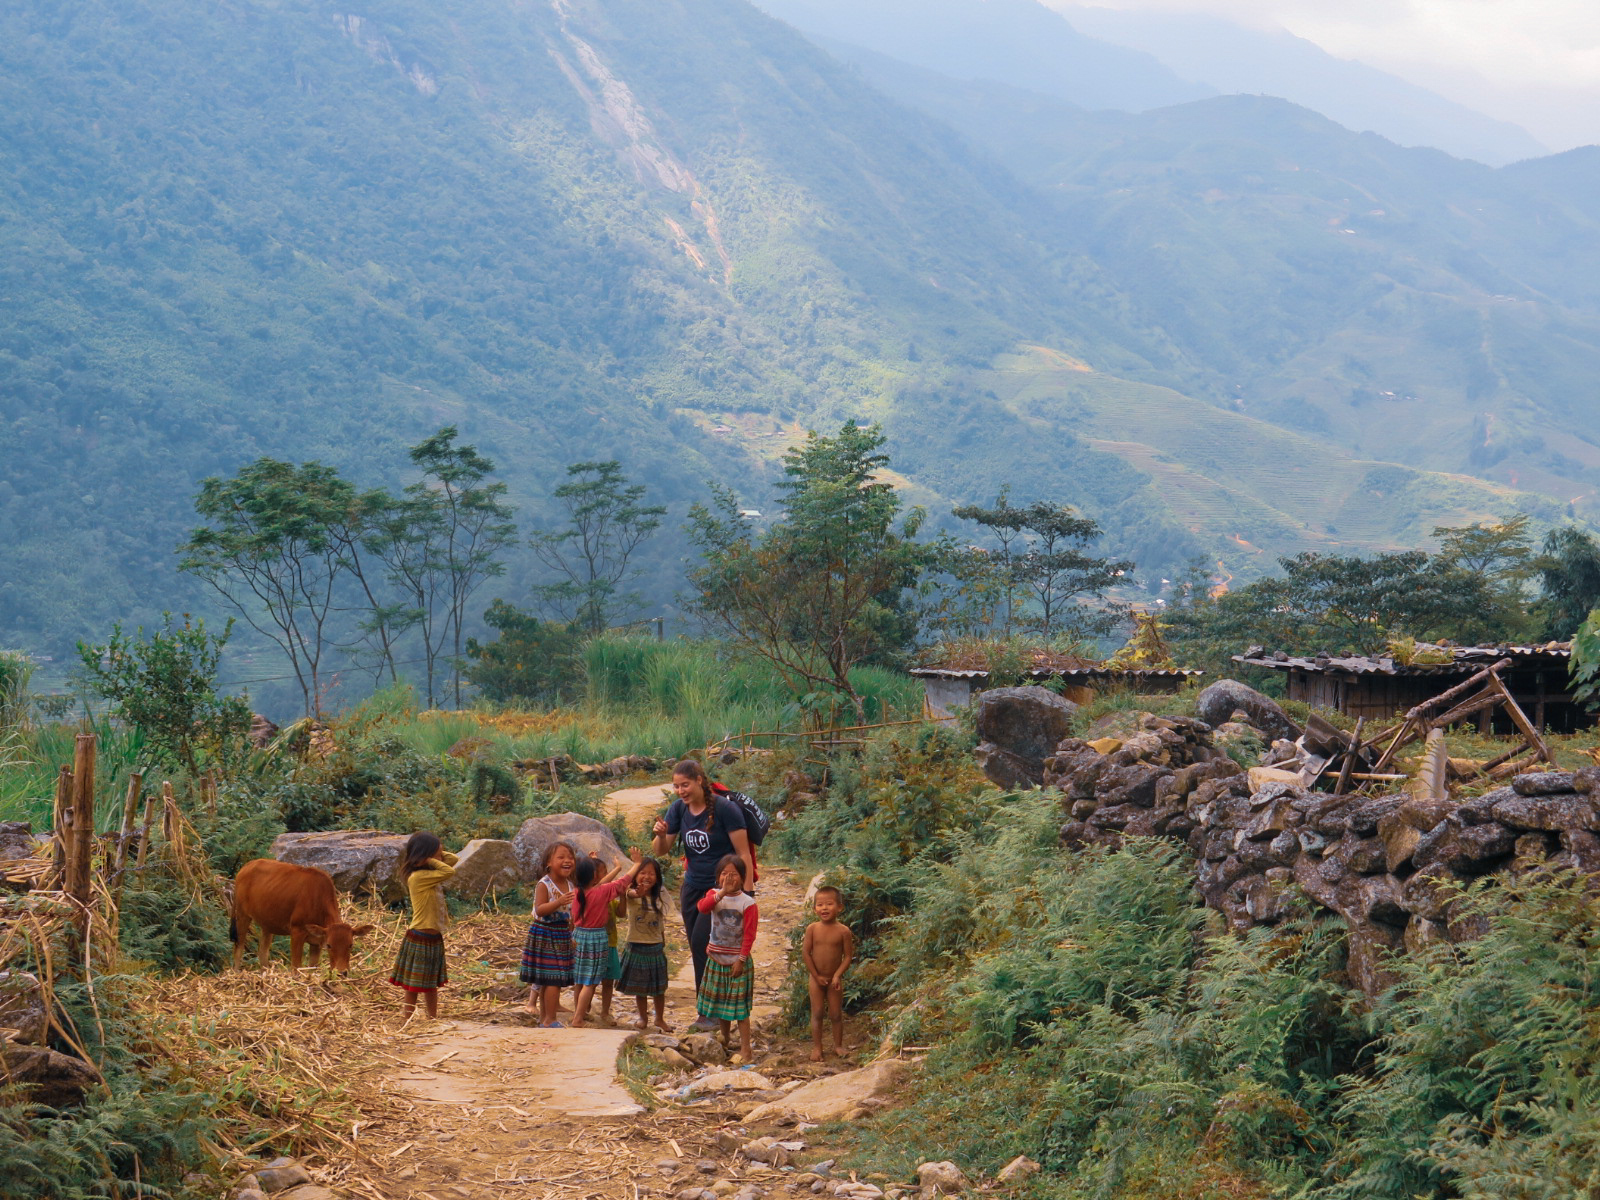 Sapa is full of happy children who play in total freedom; when we cross a village, they leave their games and come to greet us; they smile all the time and chase us through the mountains.